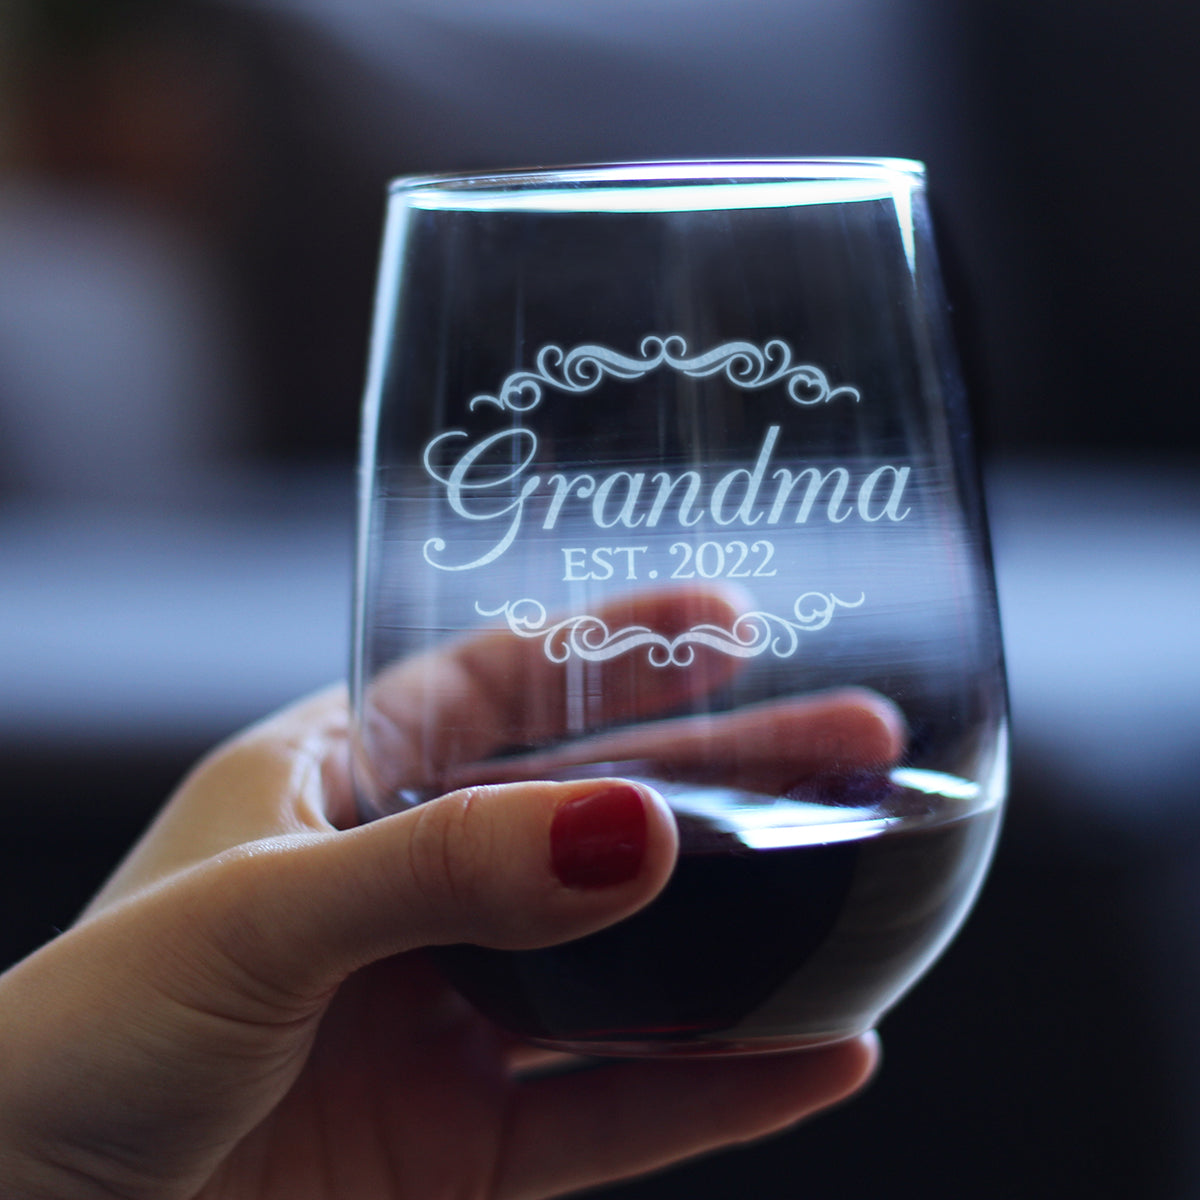 Grandma Est 2022 - New Grandmother Stemless Wine Glass Gift for First Time Grandparents - Decorative 17 Oz Large Glasses